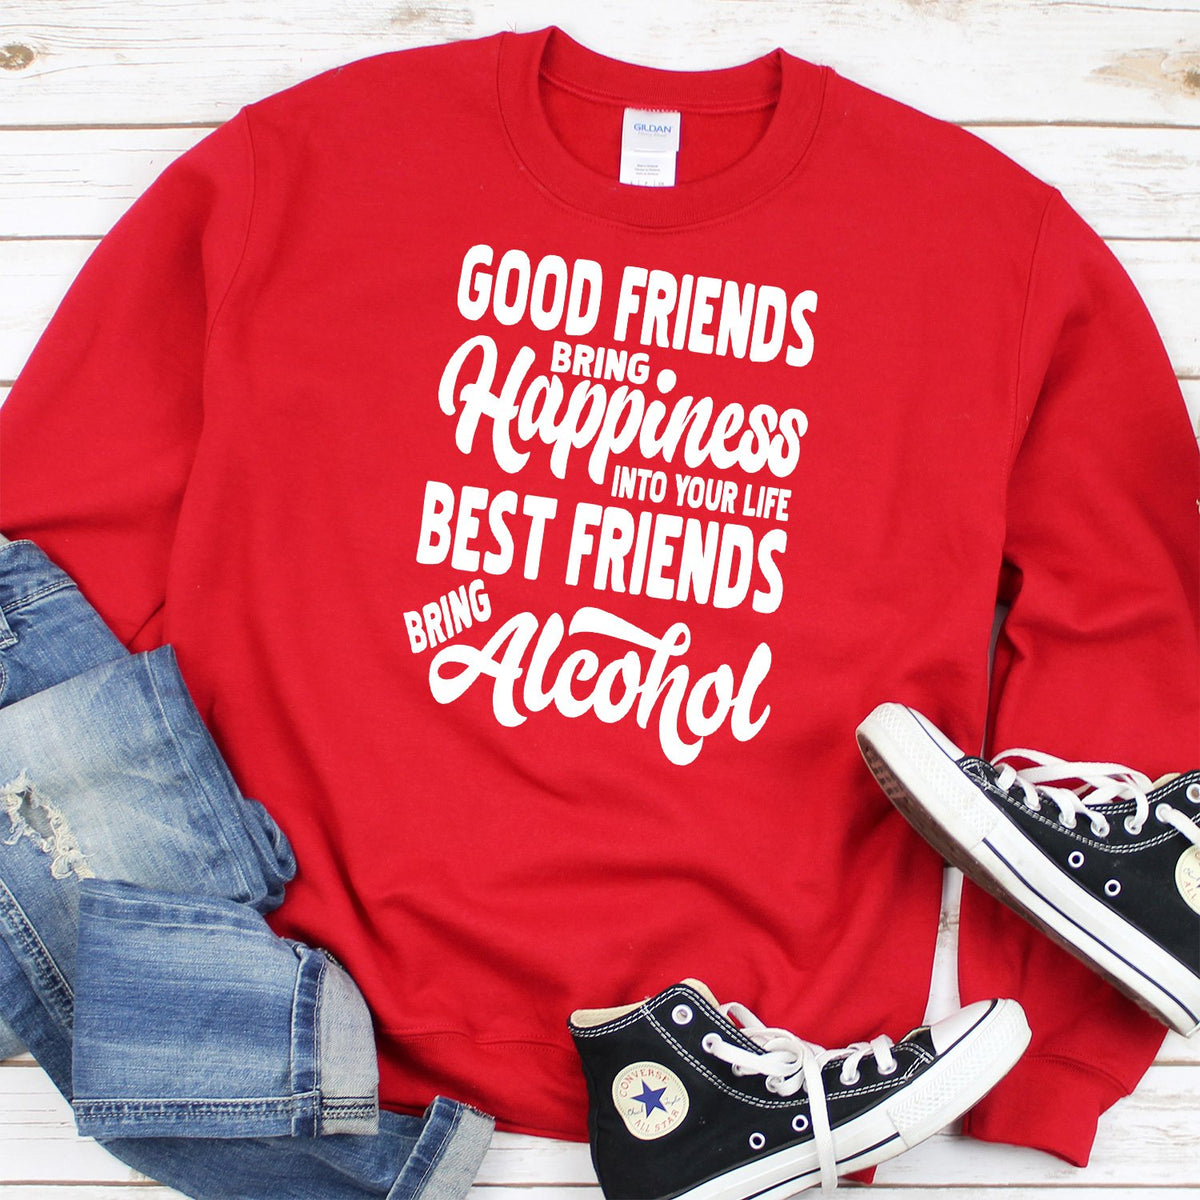 Good Friends Bring Happiness into Your Life Best Friends Bring Alcohol - Long Sleeve Heavy Crewneck Sweatshirt